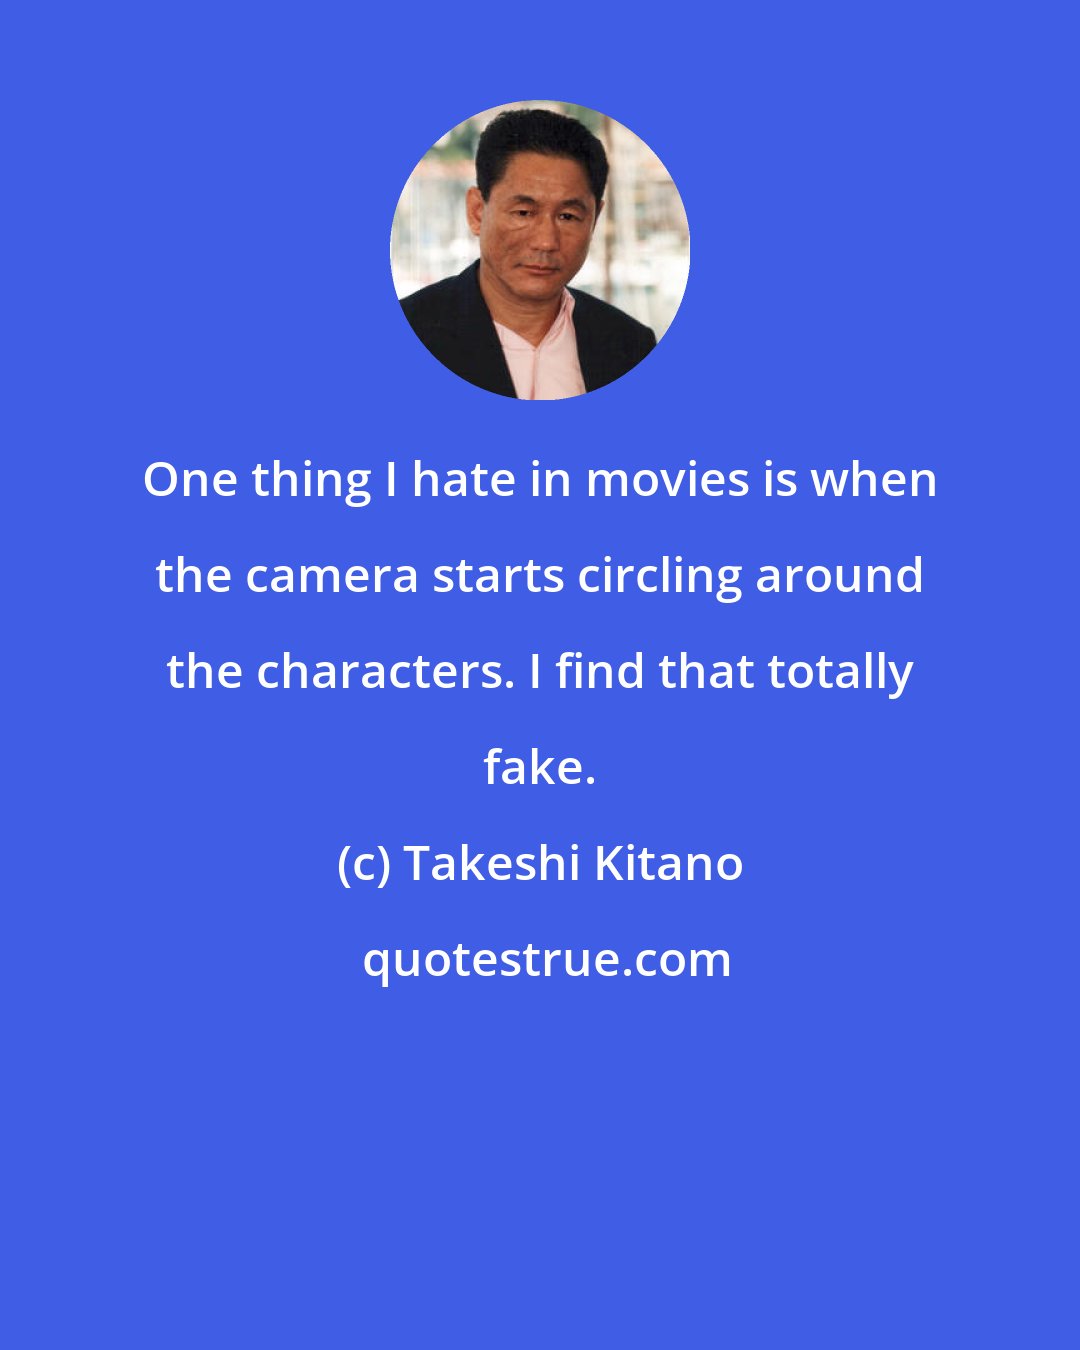 Takeshi Kitano: One thing I hate in movies is when the camera starts circling around the characters. I find that totally fake.